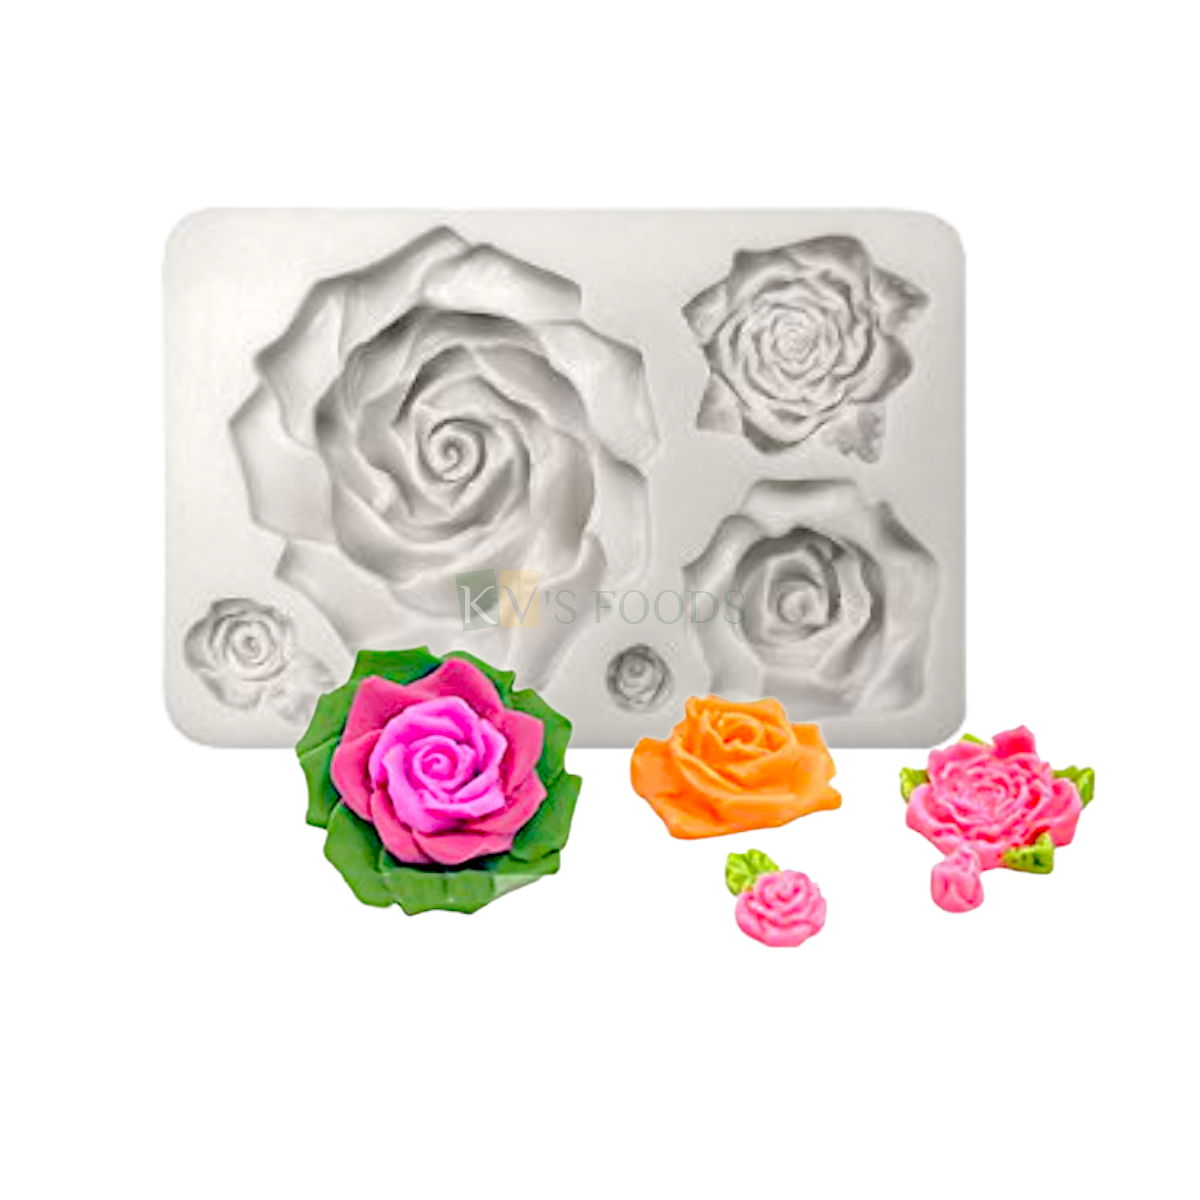 1 PC Silicone Fondant Rose And leaf Chocolate Mould 5 Cavity, Mini Roses Flowers Collection Fondant Wedding Theme Red Rose Cupcake Theme, Garden Anniversary Cakes Happy Birthday Theme Flexible Moulds